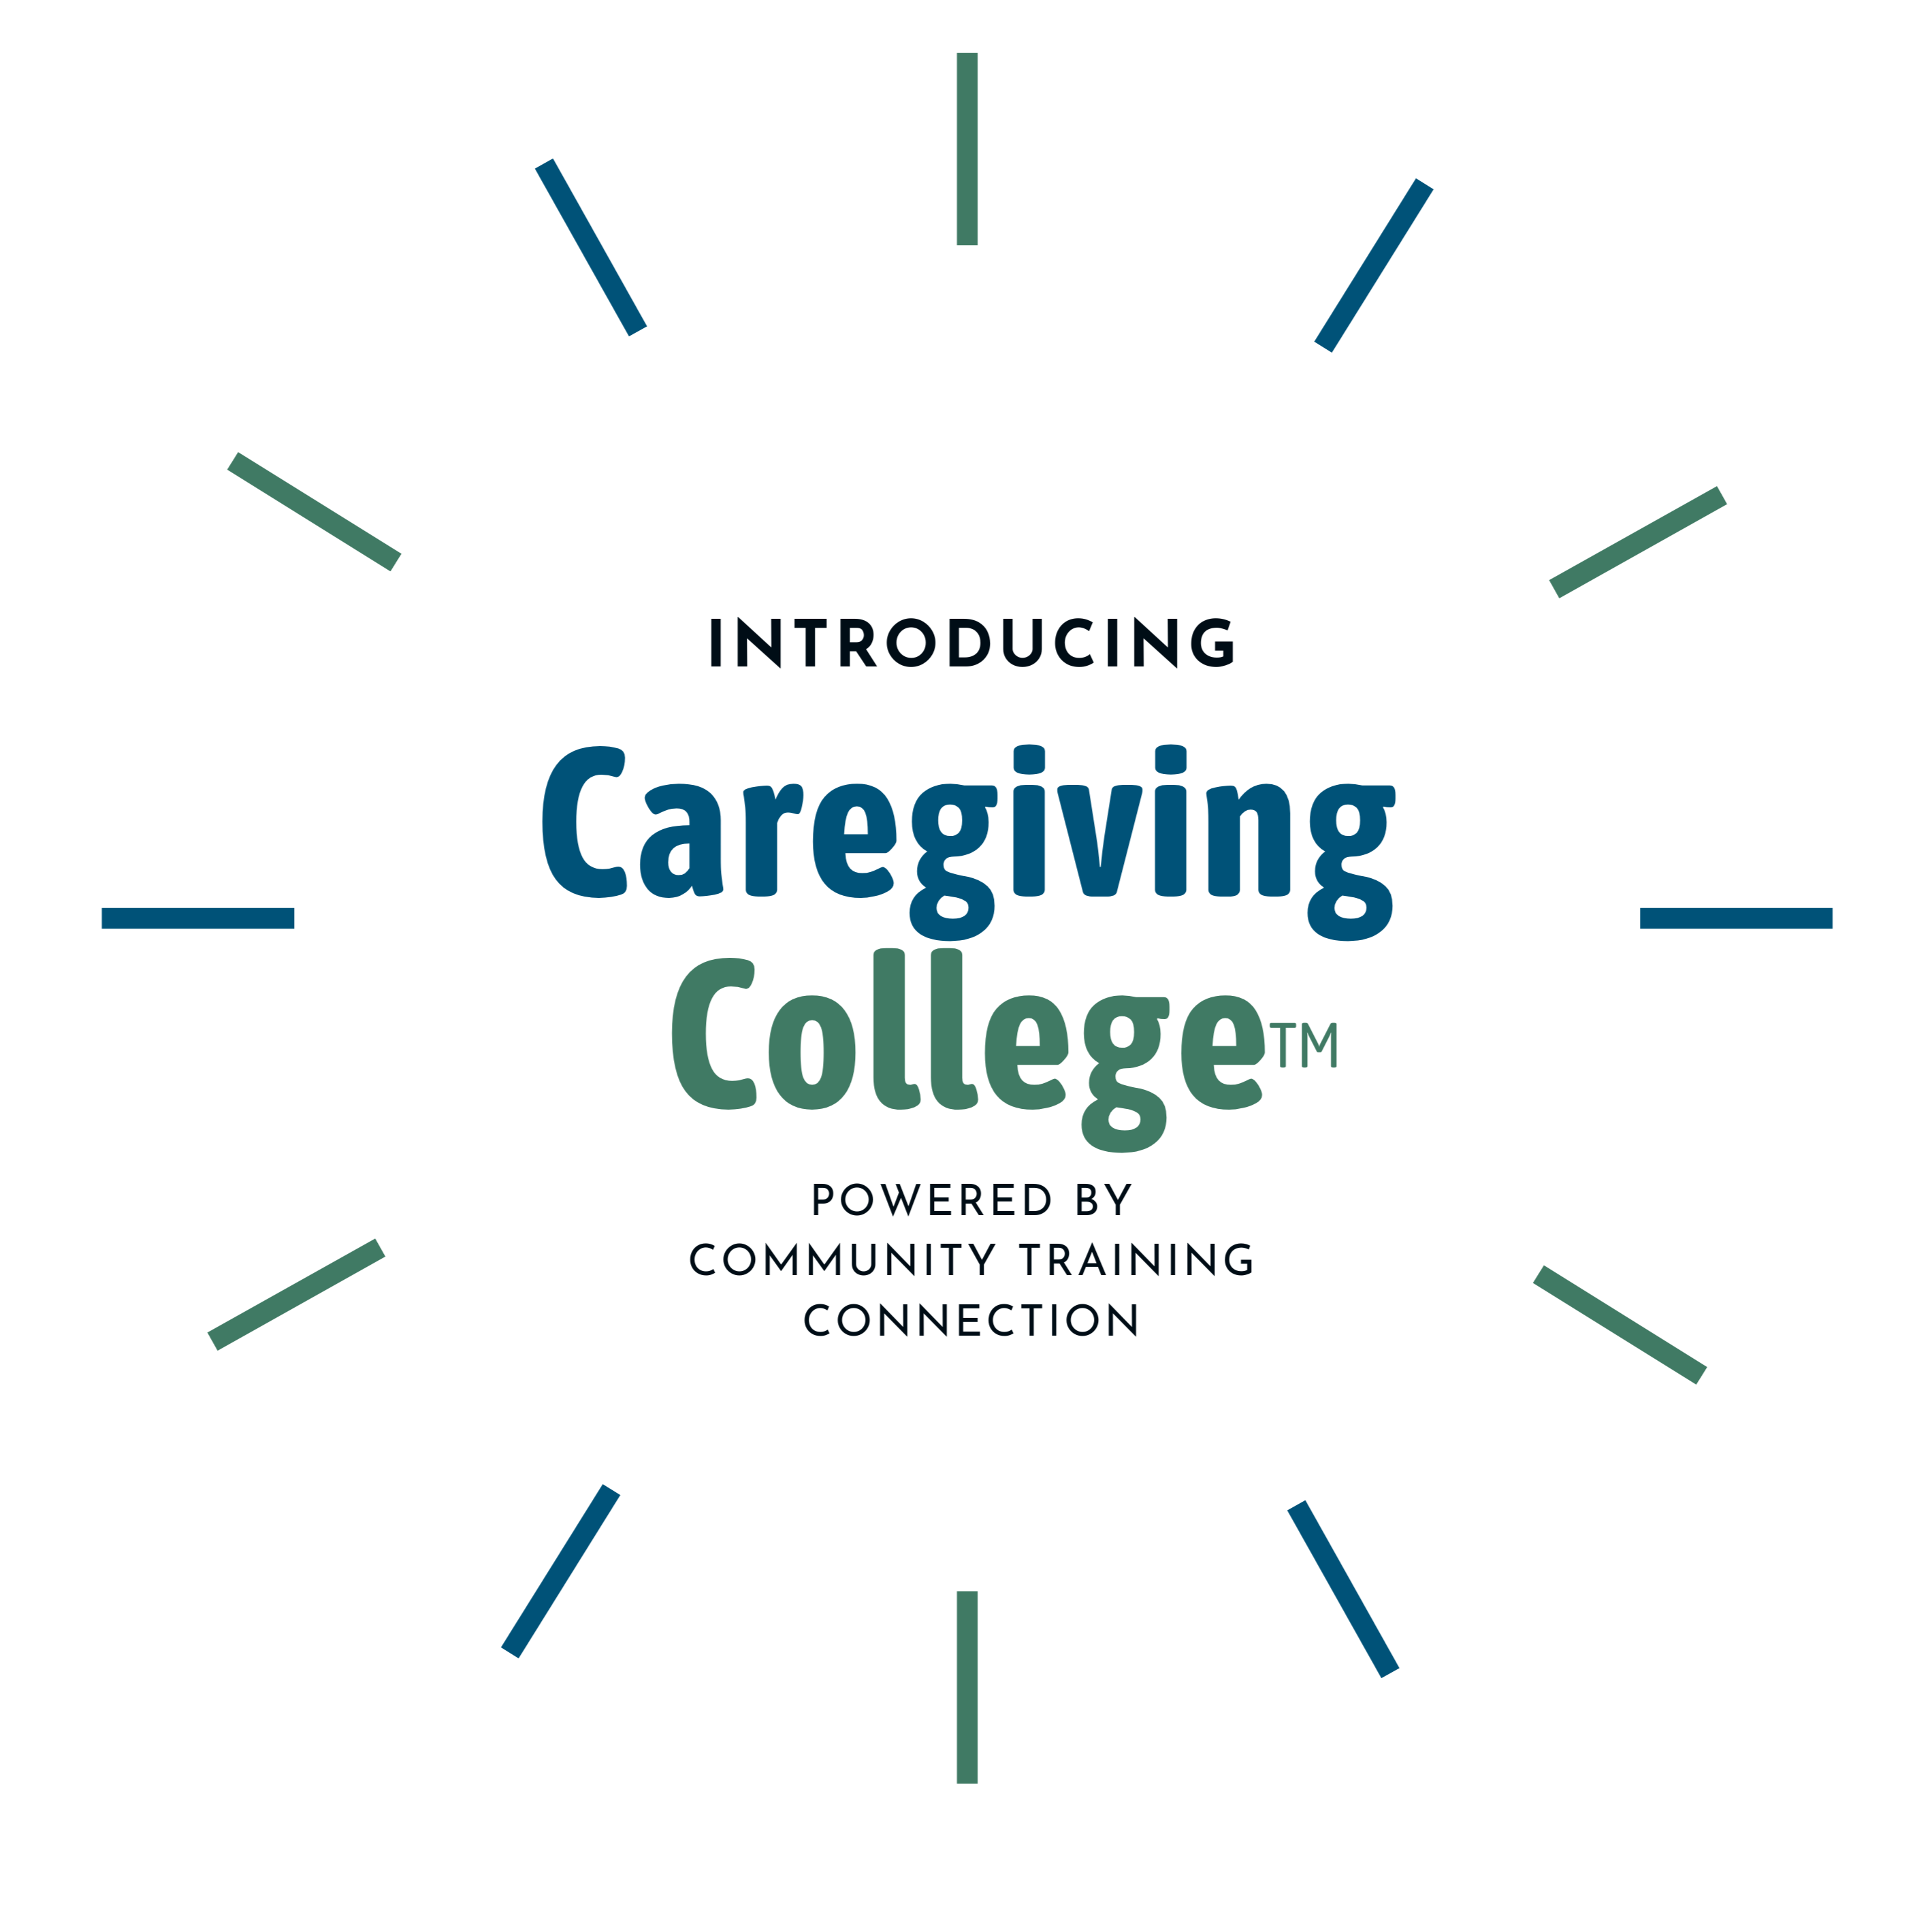 Introducing Caregiving College by Community Training Connection